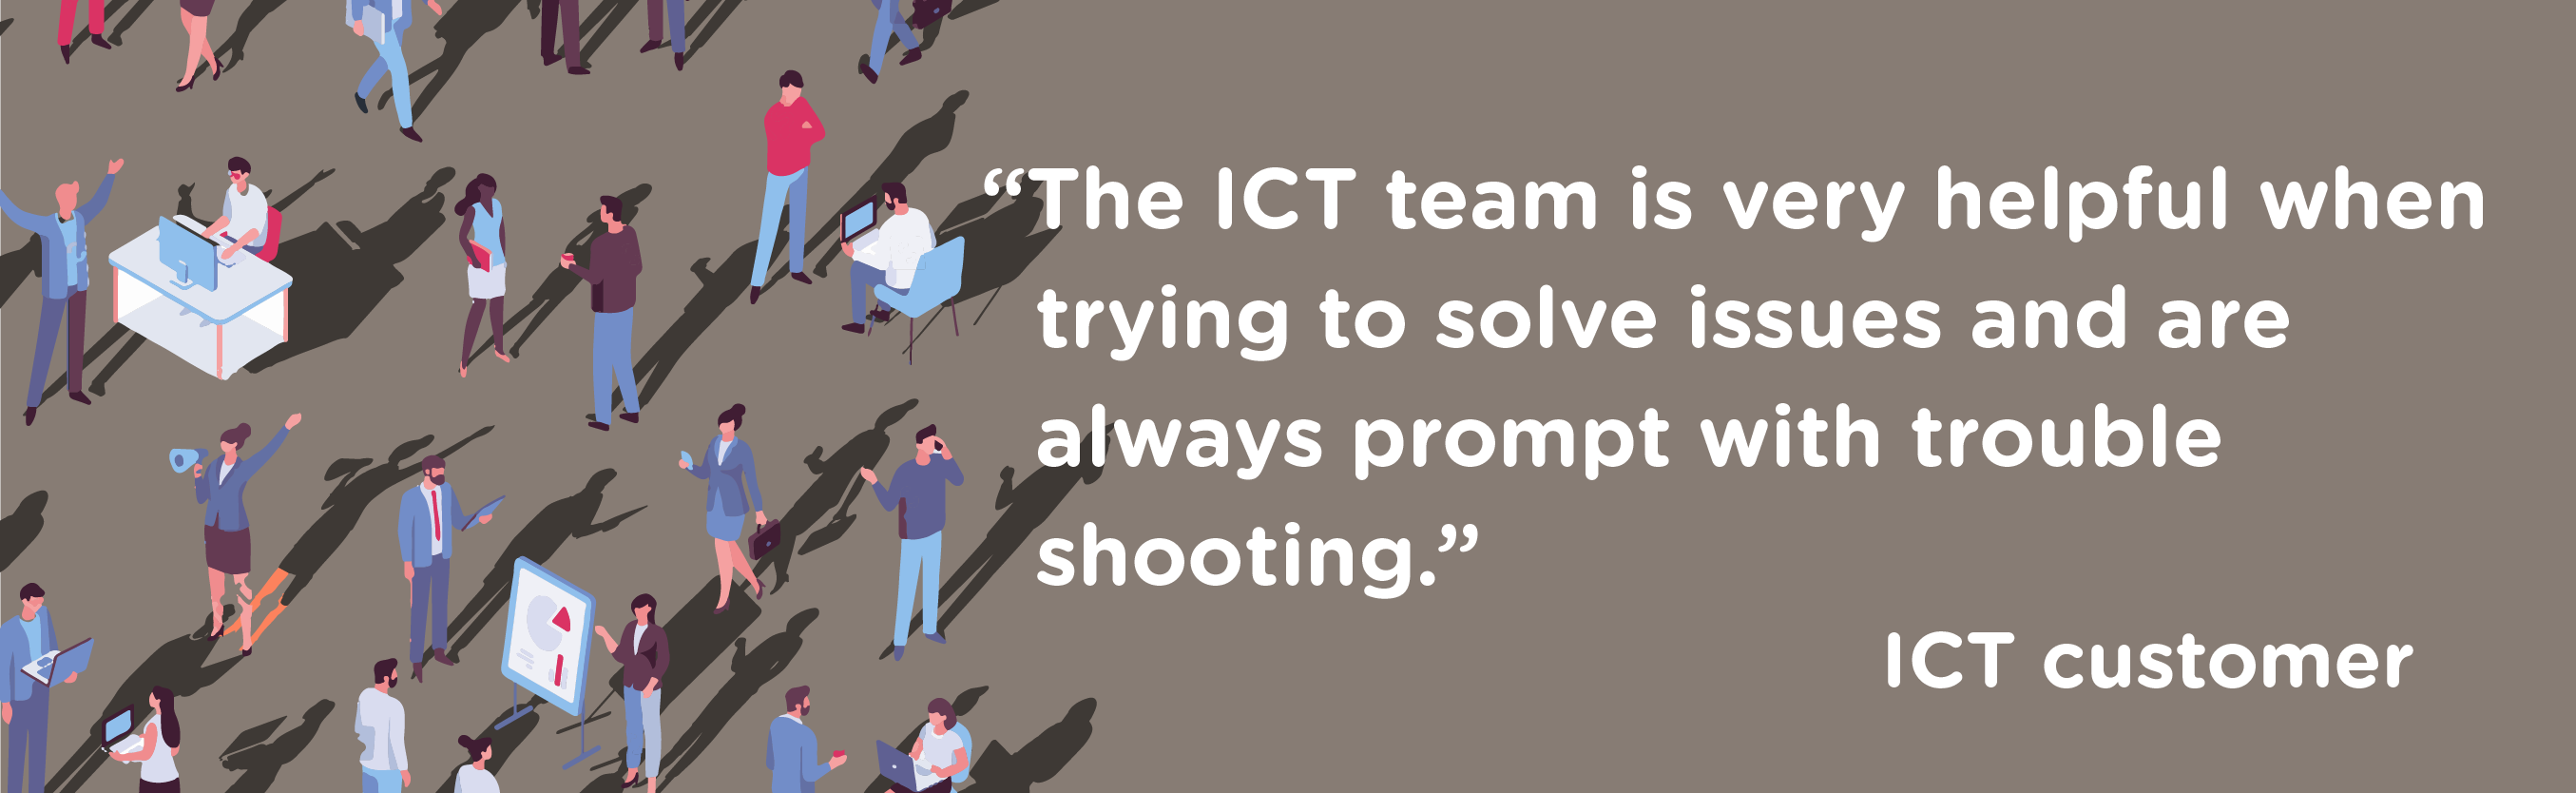 ICT customer quote reading "The ICT team is very helpful when trying to solve issues and are always prompt with trouble shooting."